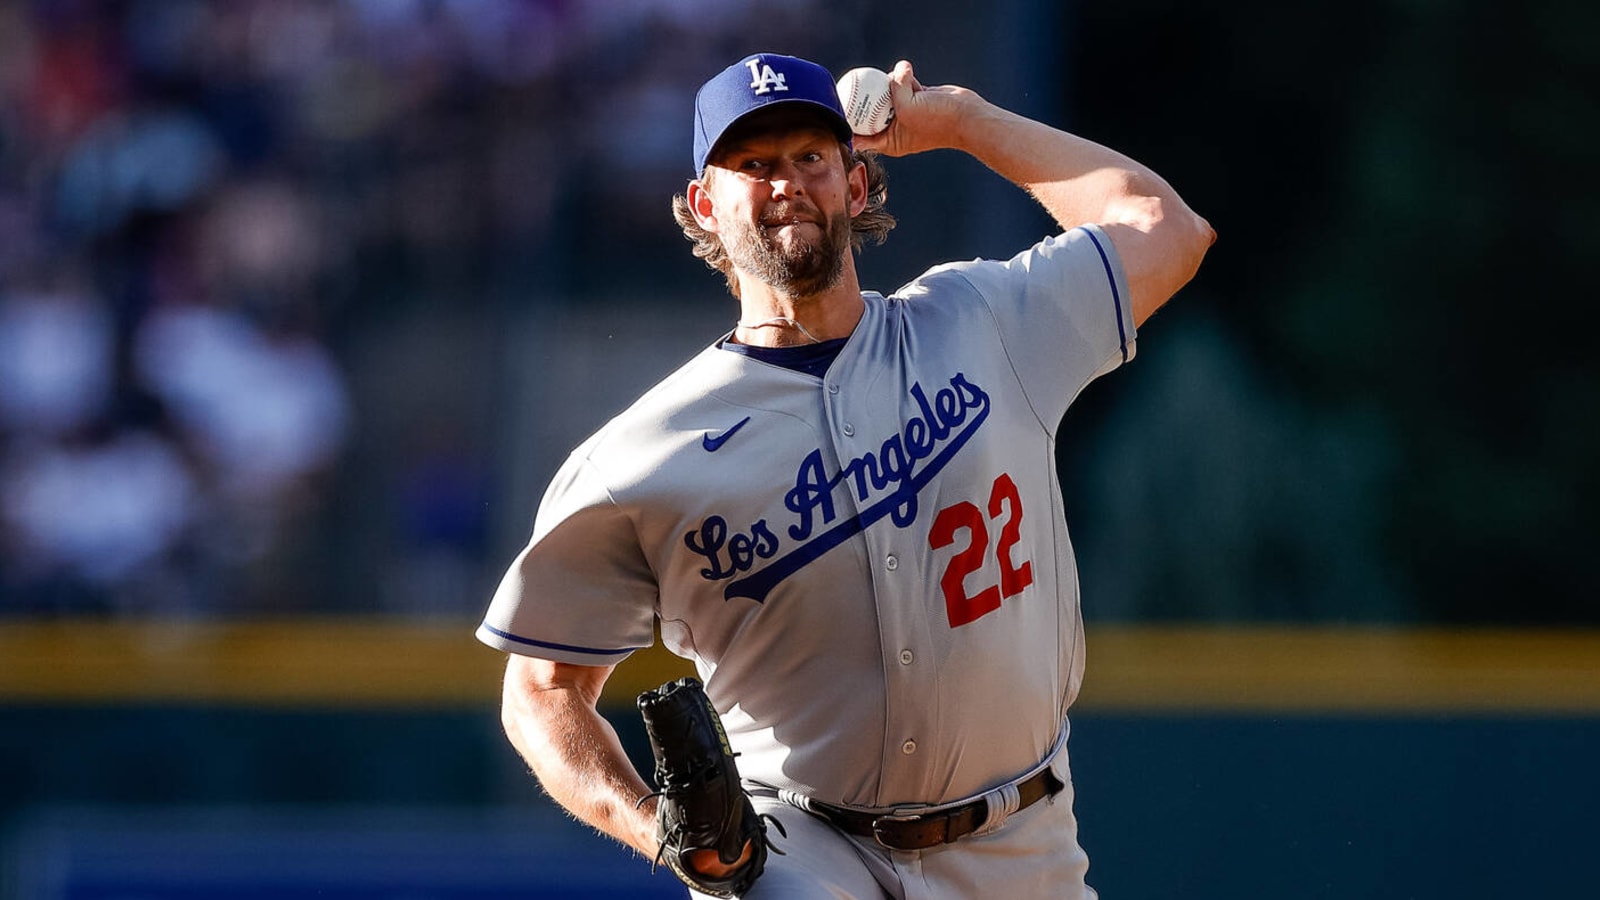 Report reveals latest with Dodgers' Clayton Kershaw